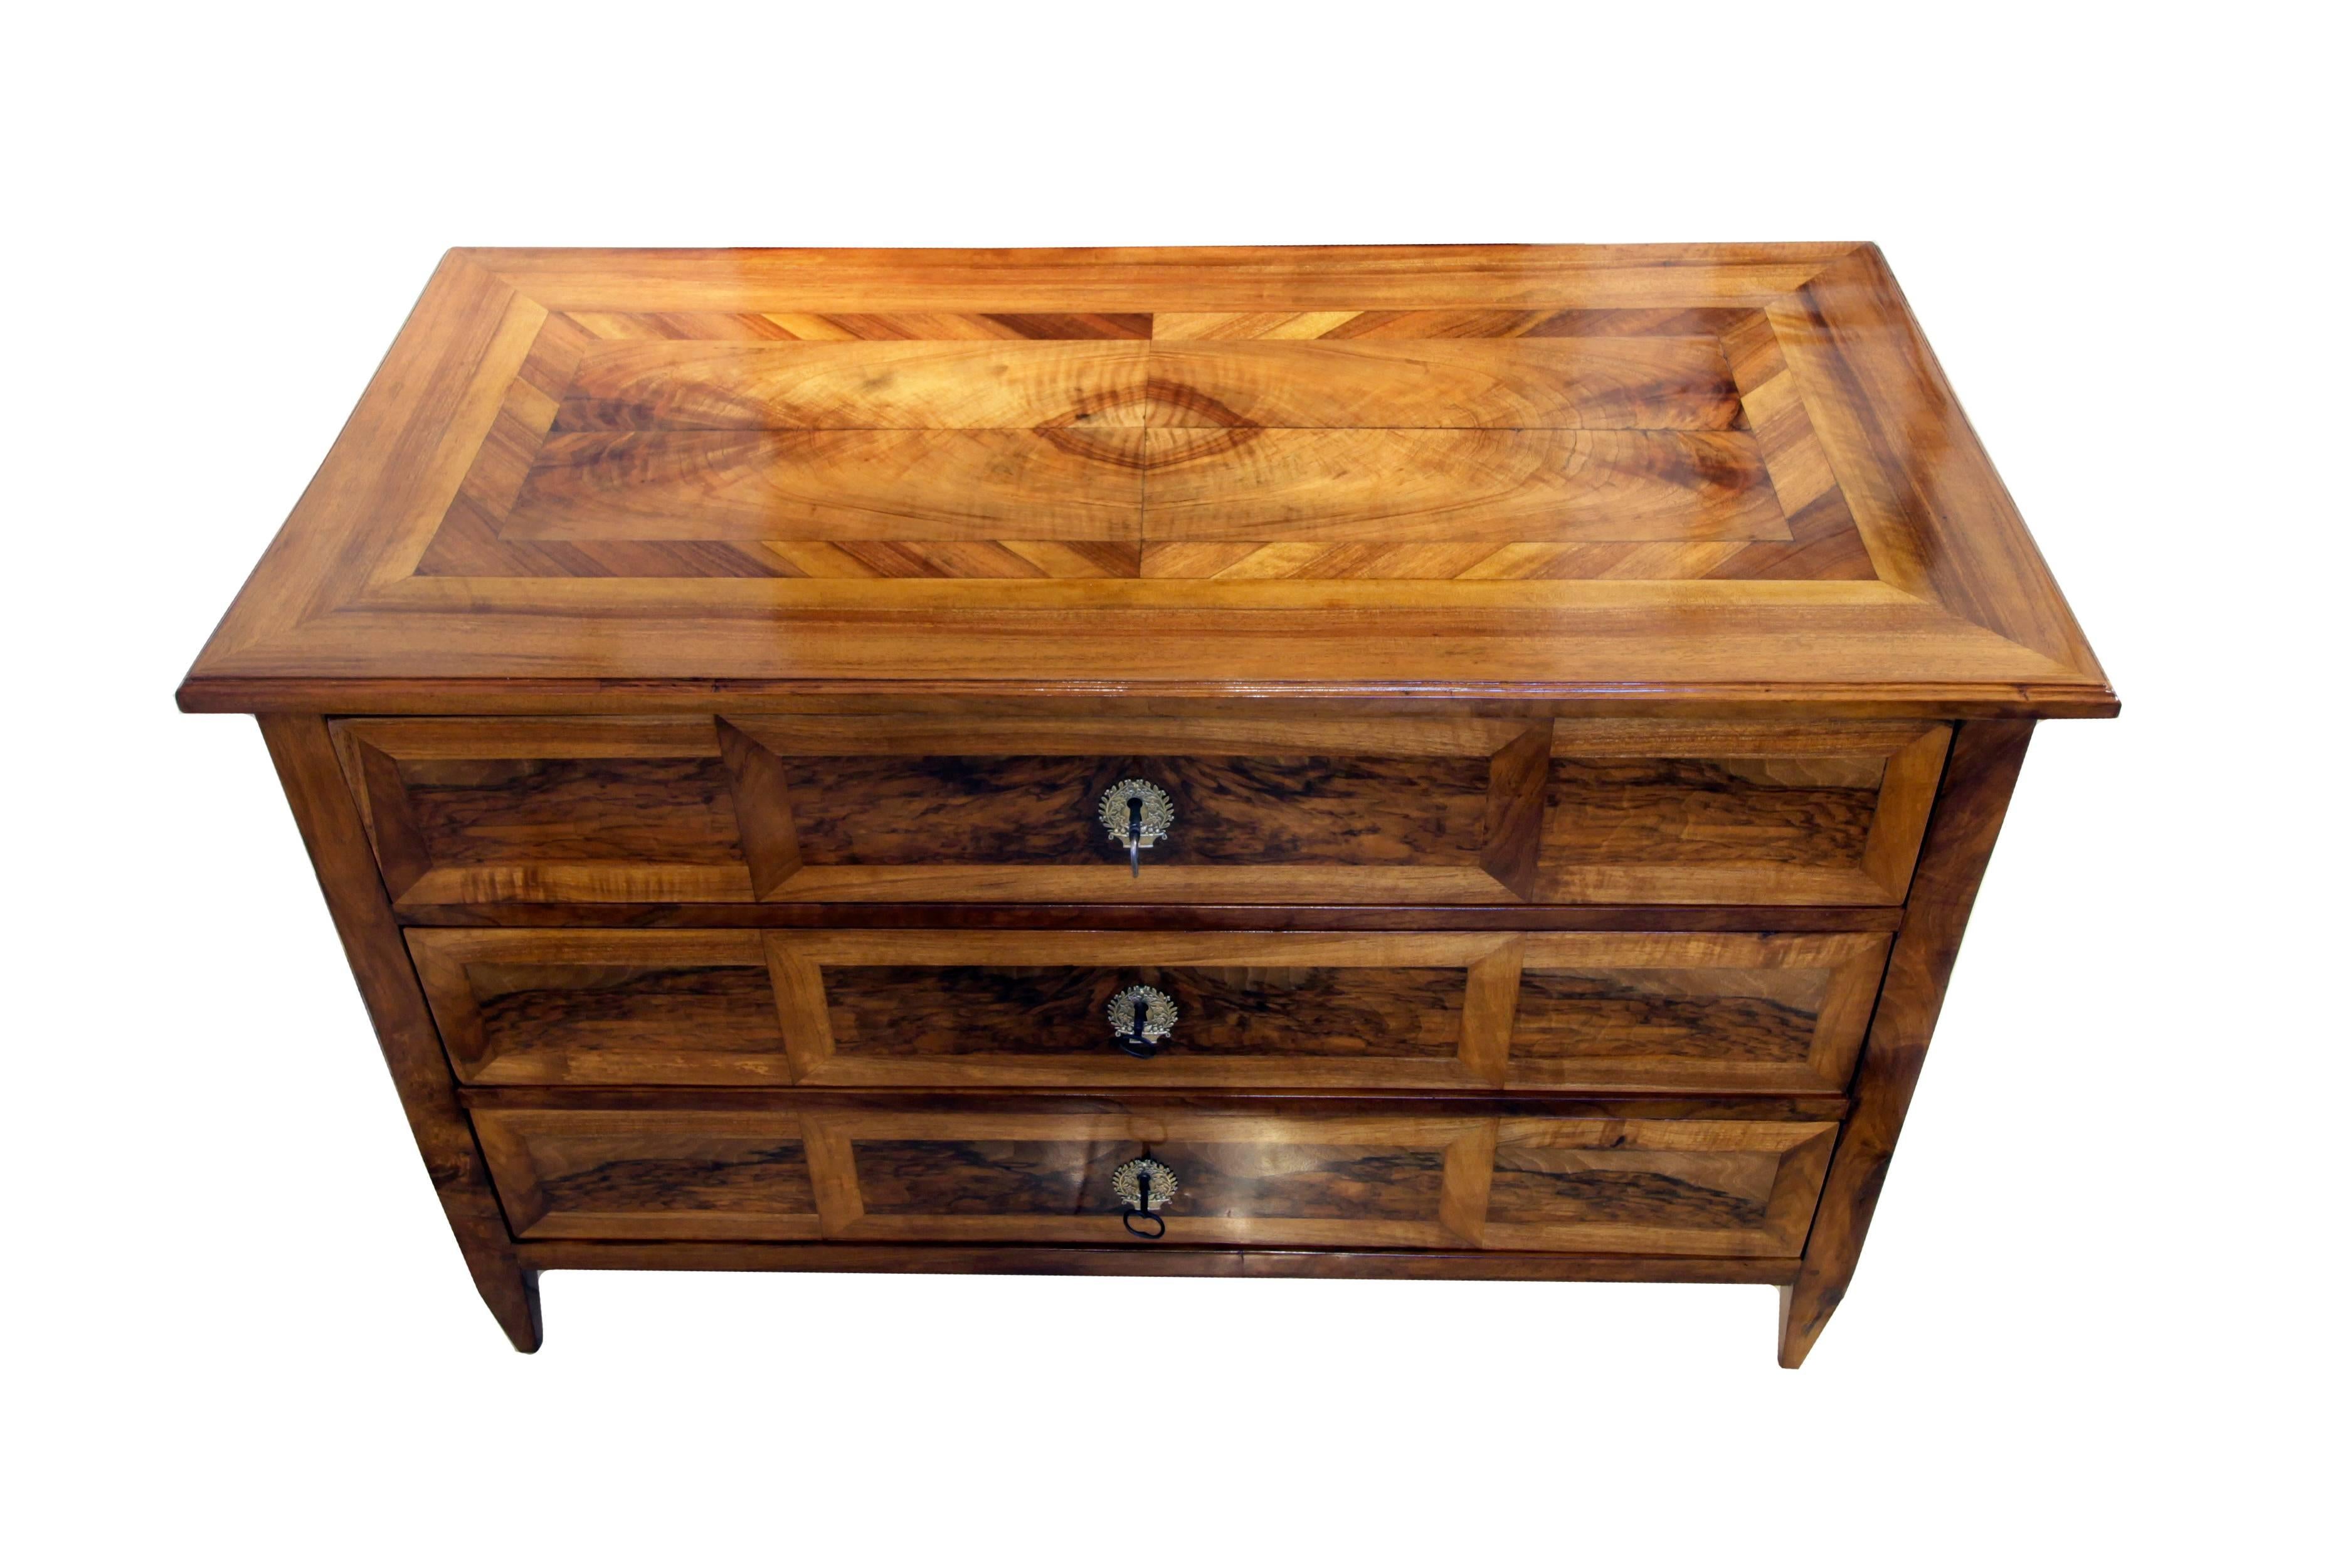 An 18th century Louis XVI marquetry commode with three drawers was build in south Germany. The veneers of walnut and inlaid with other walnut on a pinewood corpus. All locks, fittings and the key are original. The feet are tapered square. It is a